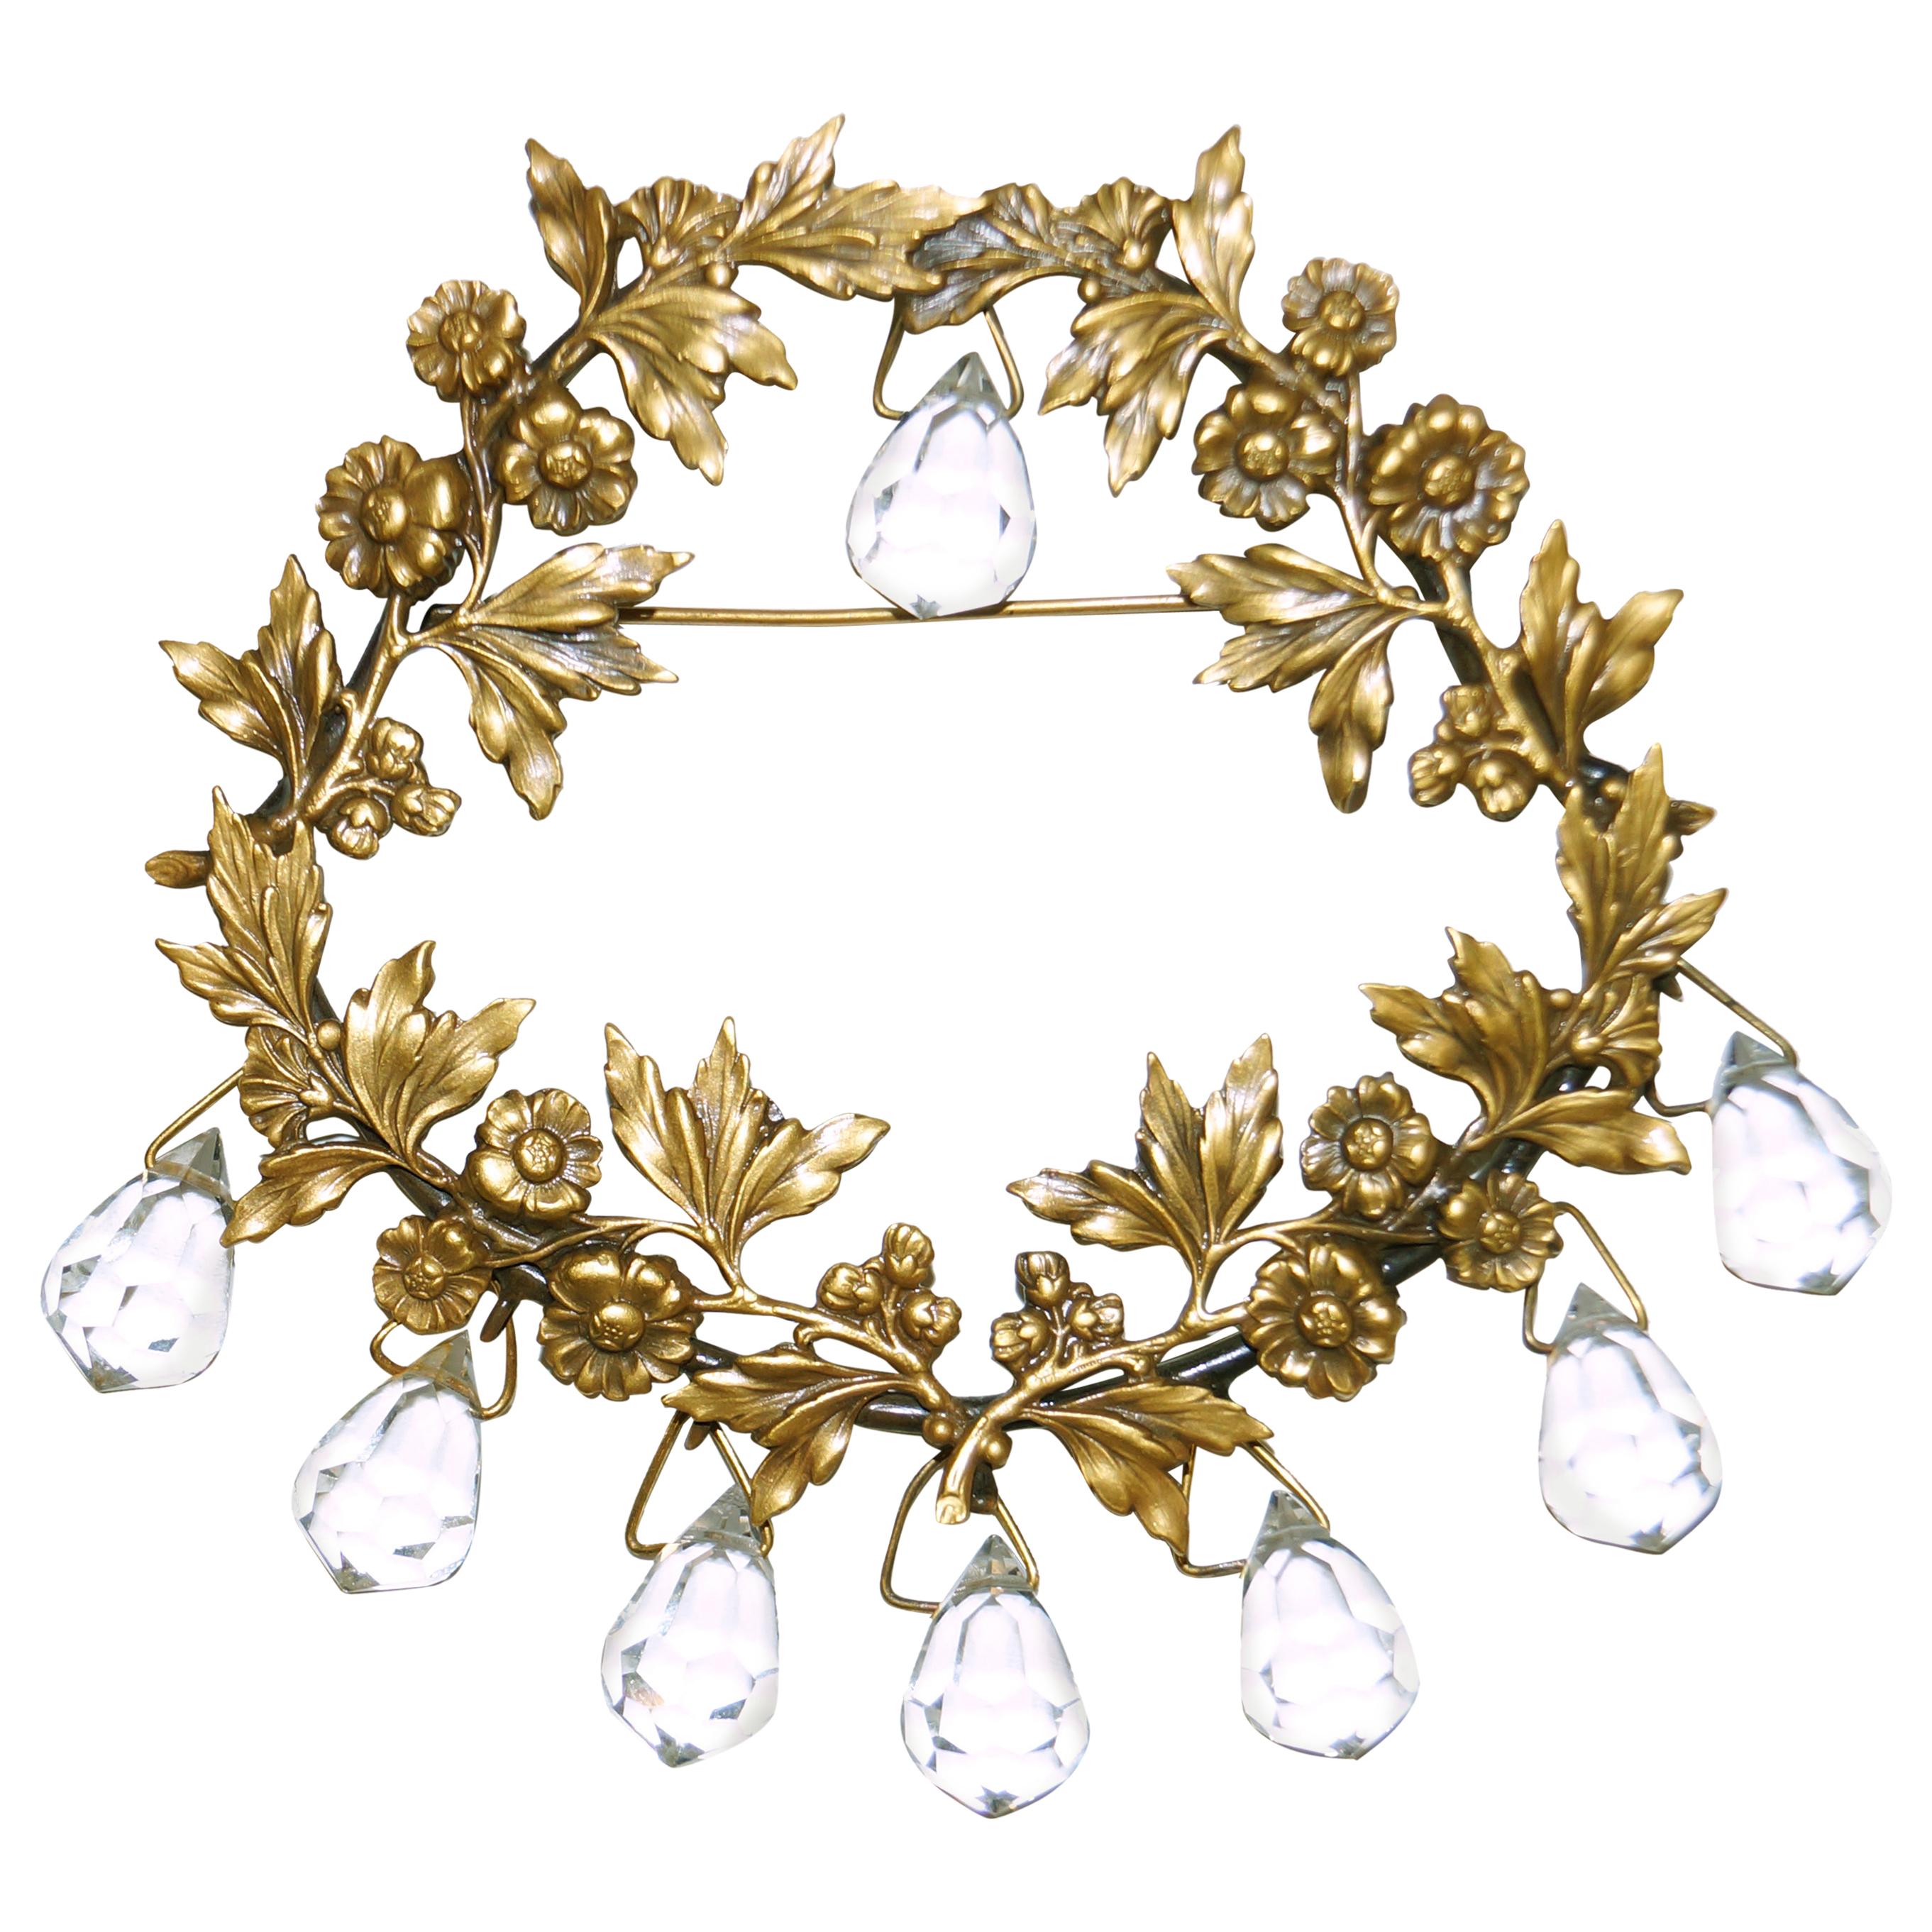  1940s Joseff of Hollywood Chandelier Floral Wreath Brooch in Russian Gold Fin For Sale